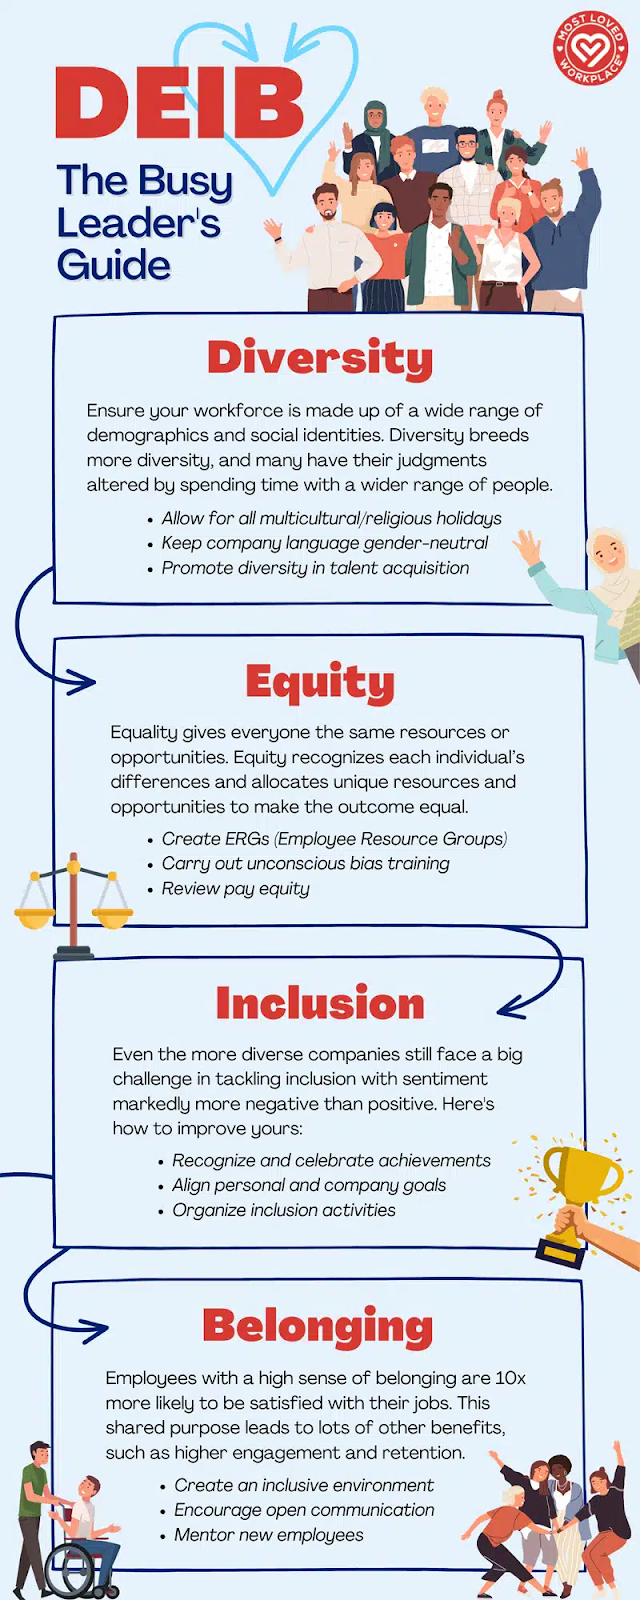 Tips for diversity, equity, inclusion, and belonging. E.g. Keep company language gender neutral, organize inclusion activities, mentor new employees.